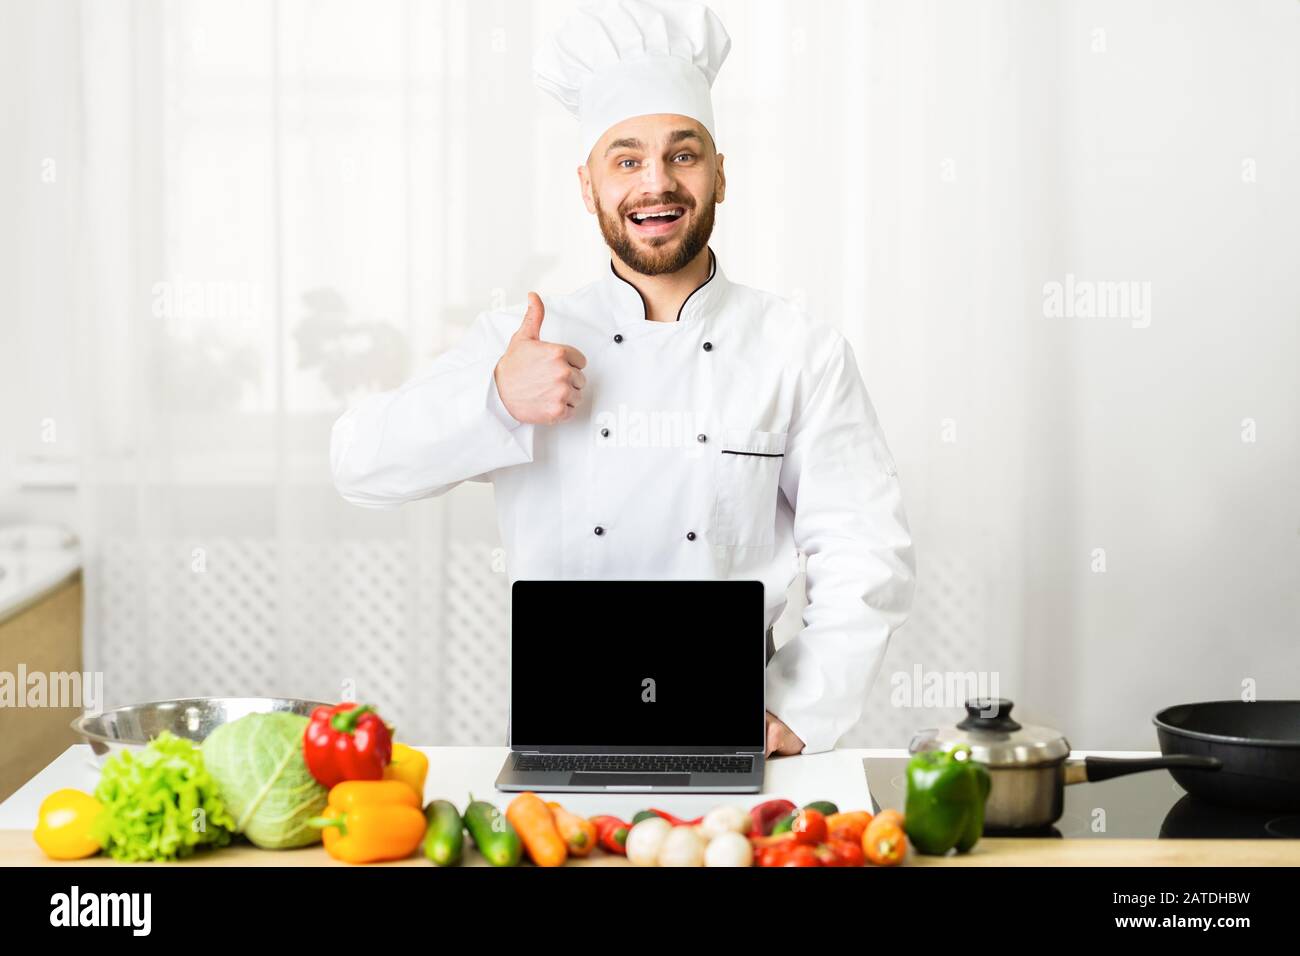 Chef Che Mostra Notebook Schermo Vuoto Gesturante Thumbs-Up Standing In Cucina Foto Stock